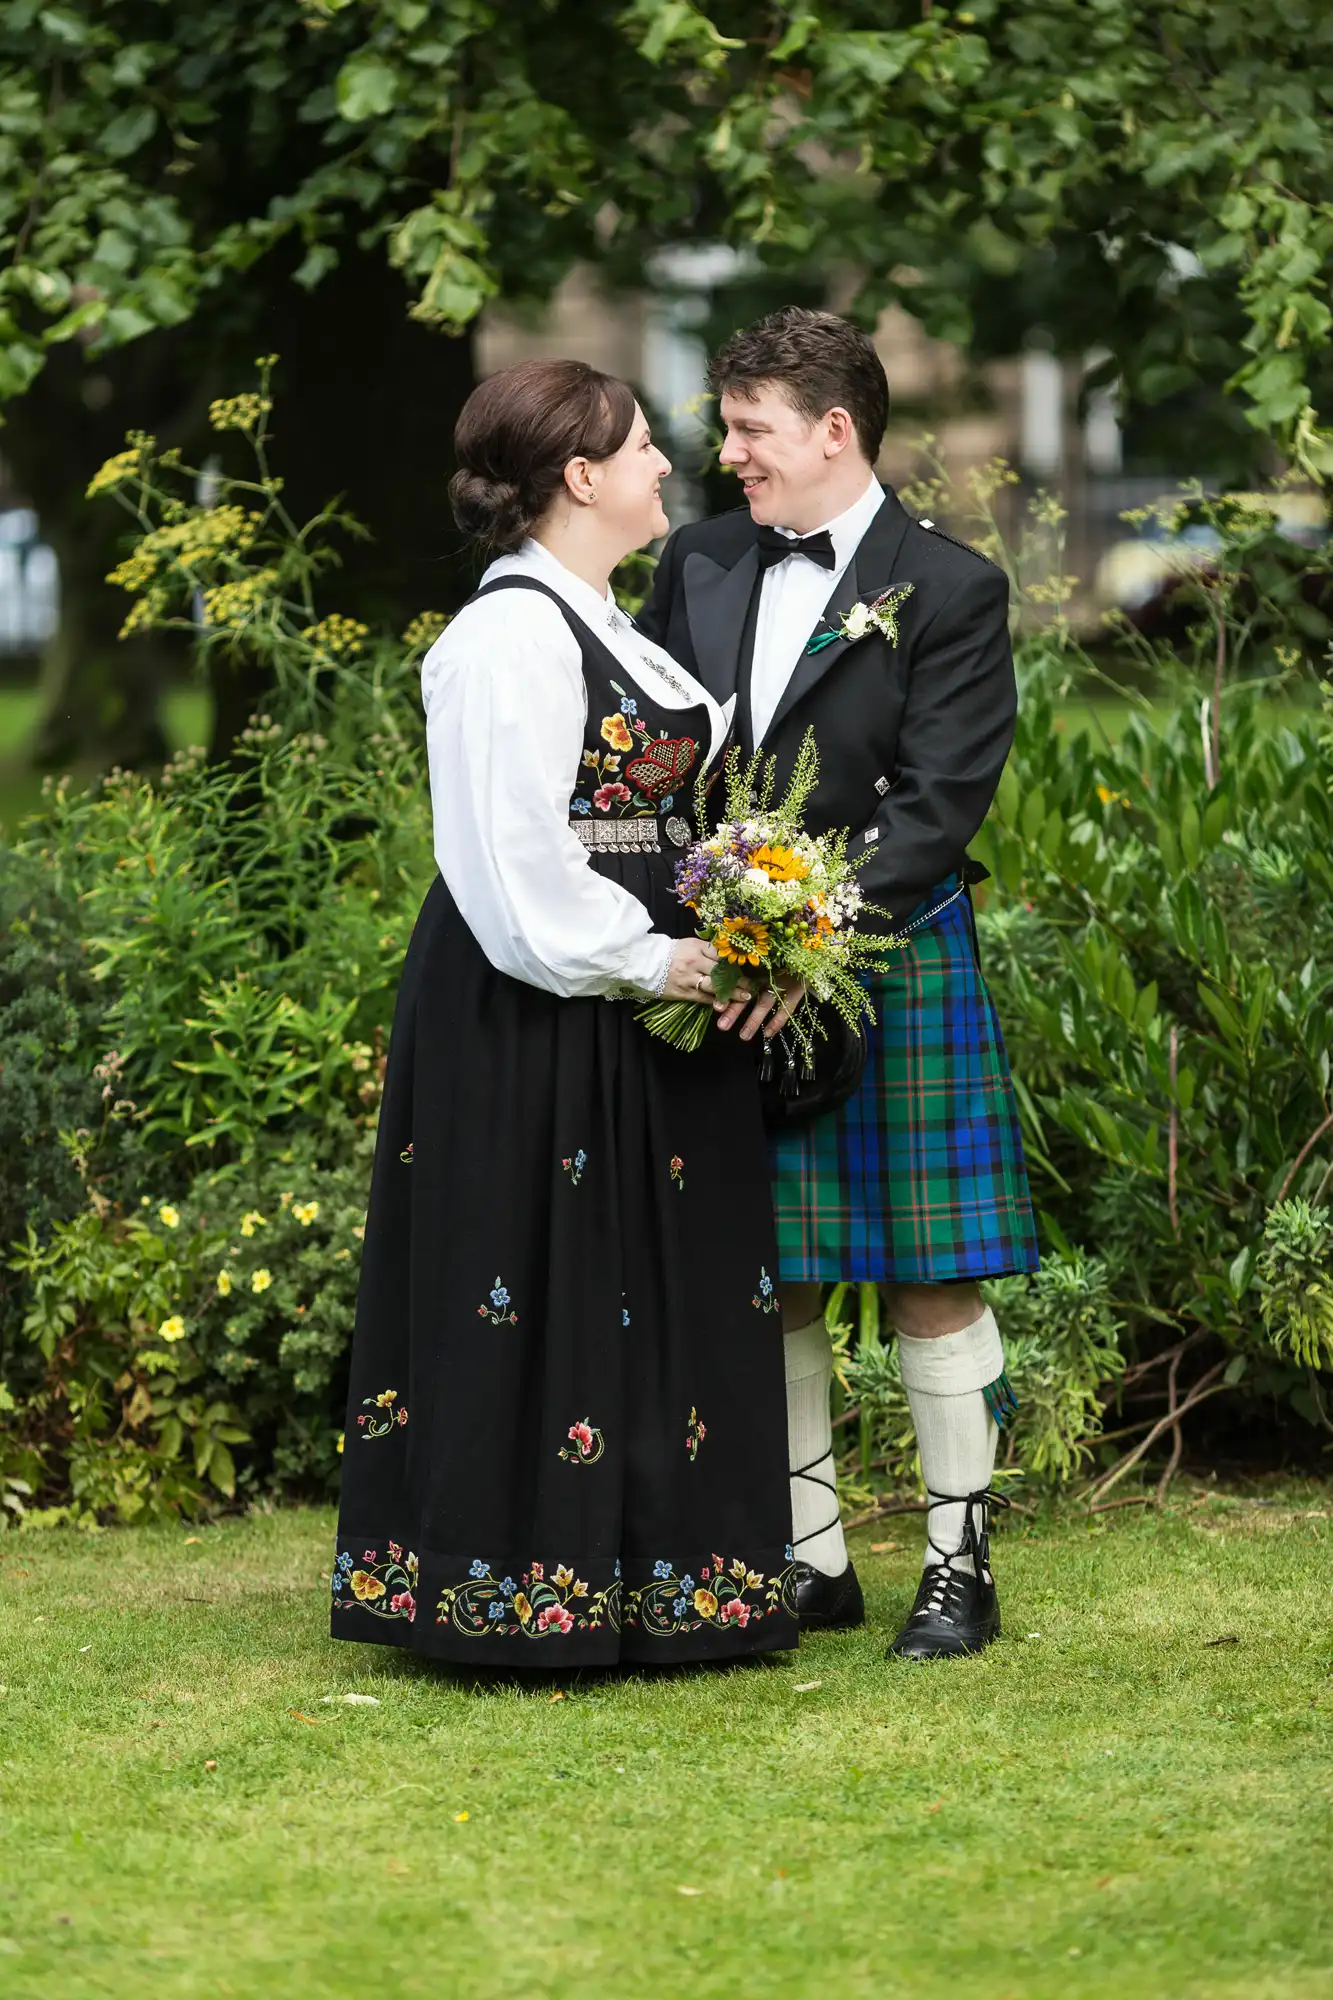 A couple in traditional scottish and norwegian attire smiling at each other in a lush garden, holding a bouquet.